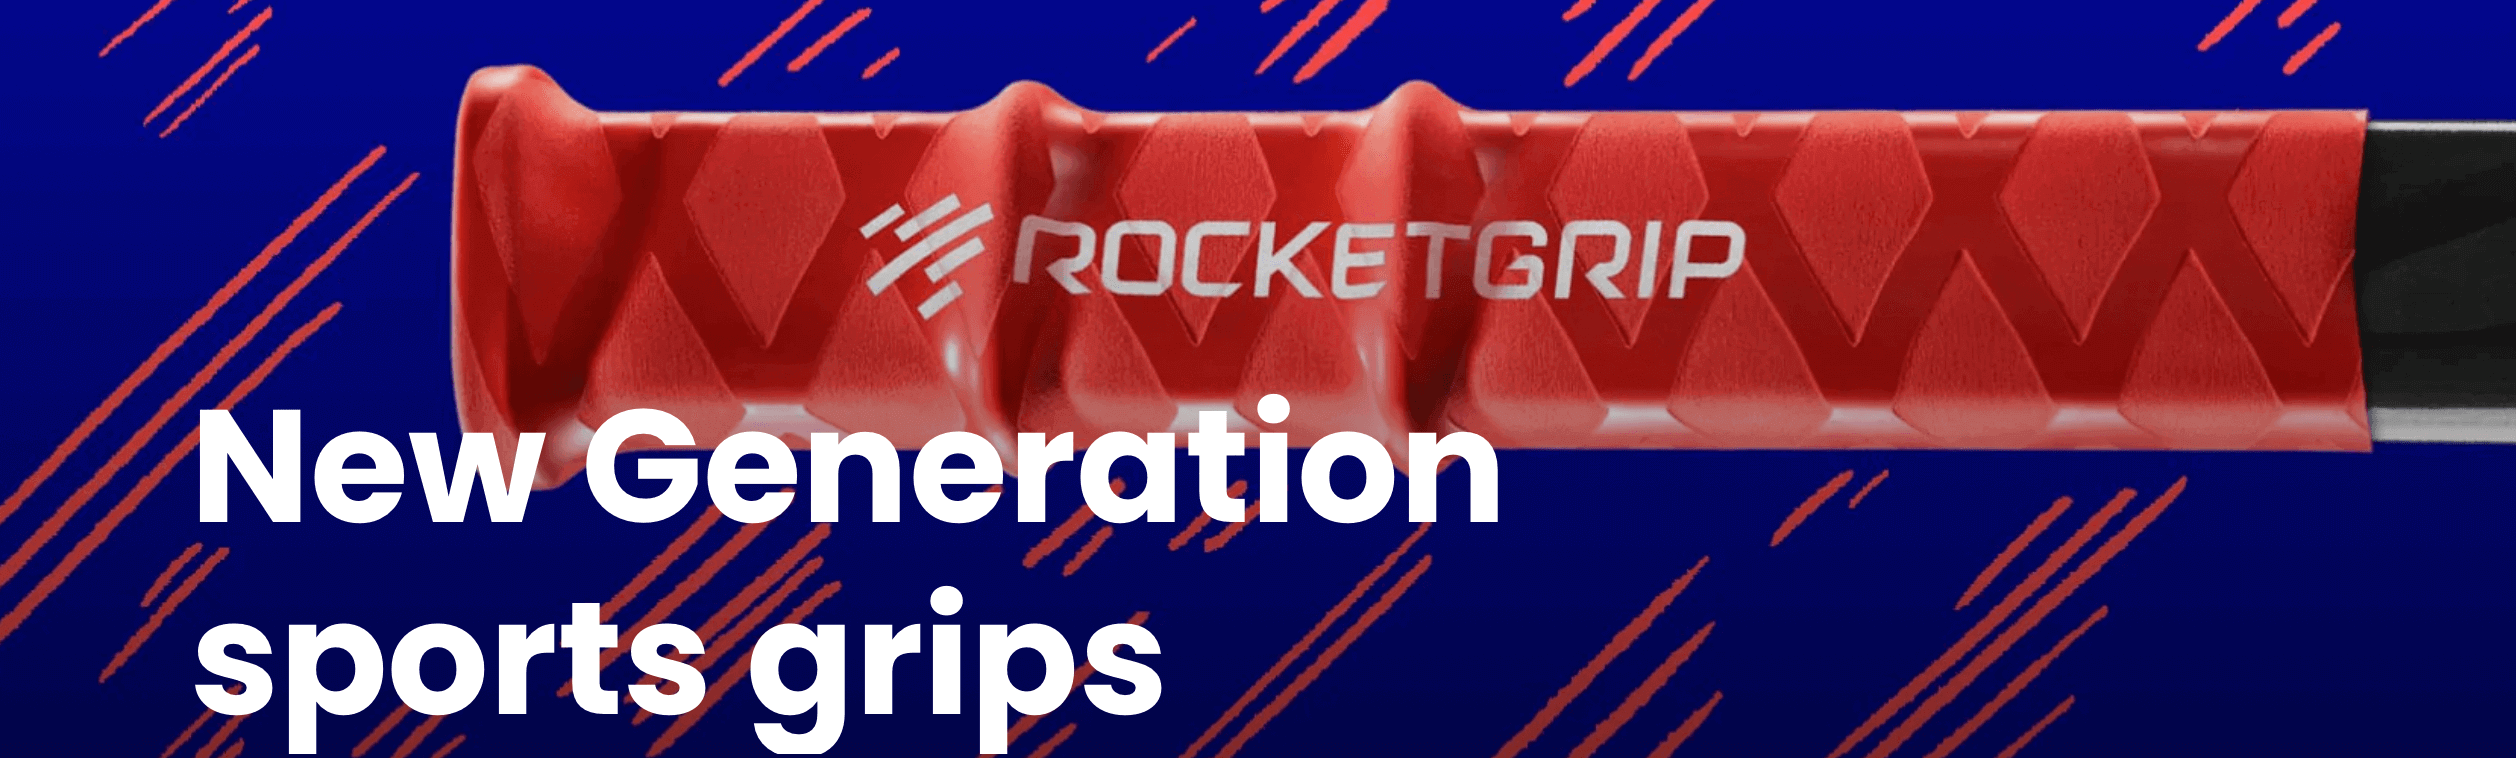 RocketGrip Stick Grips now available and your guide to fitting them